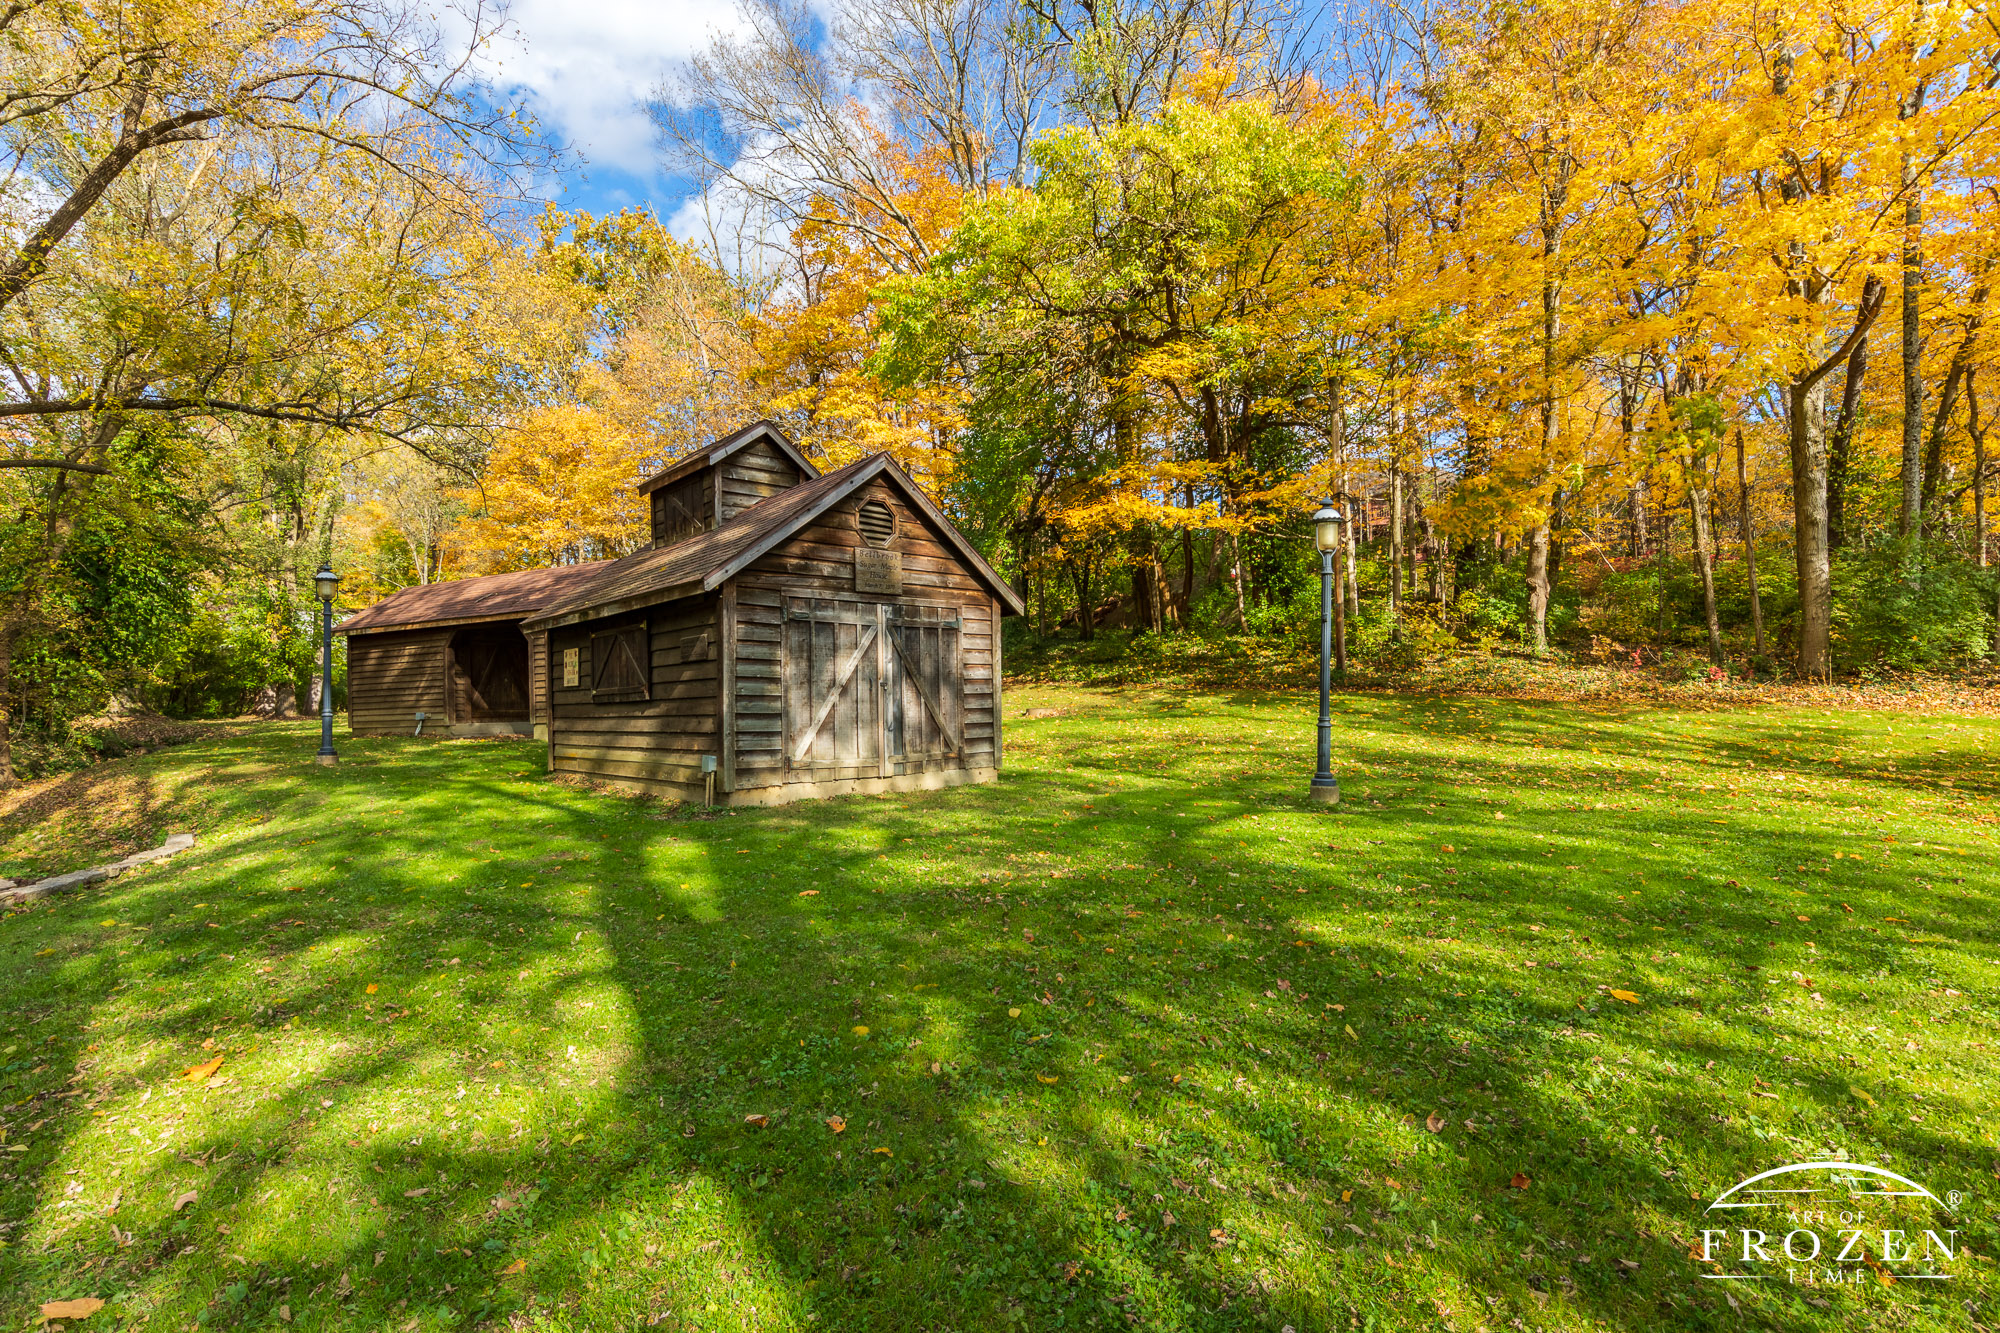 A Bellbrook Ohio wood shed surrounded by sugar maple trees displaying their bright yellow leaves